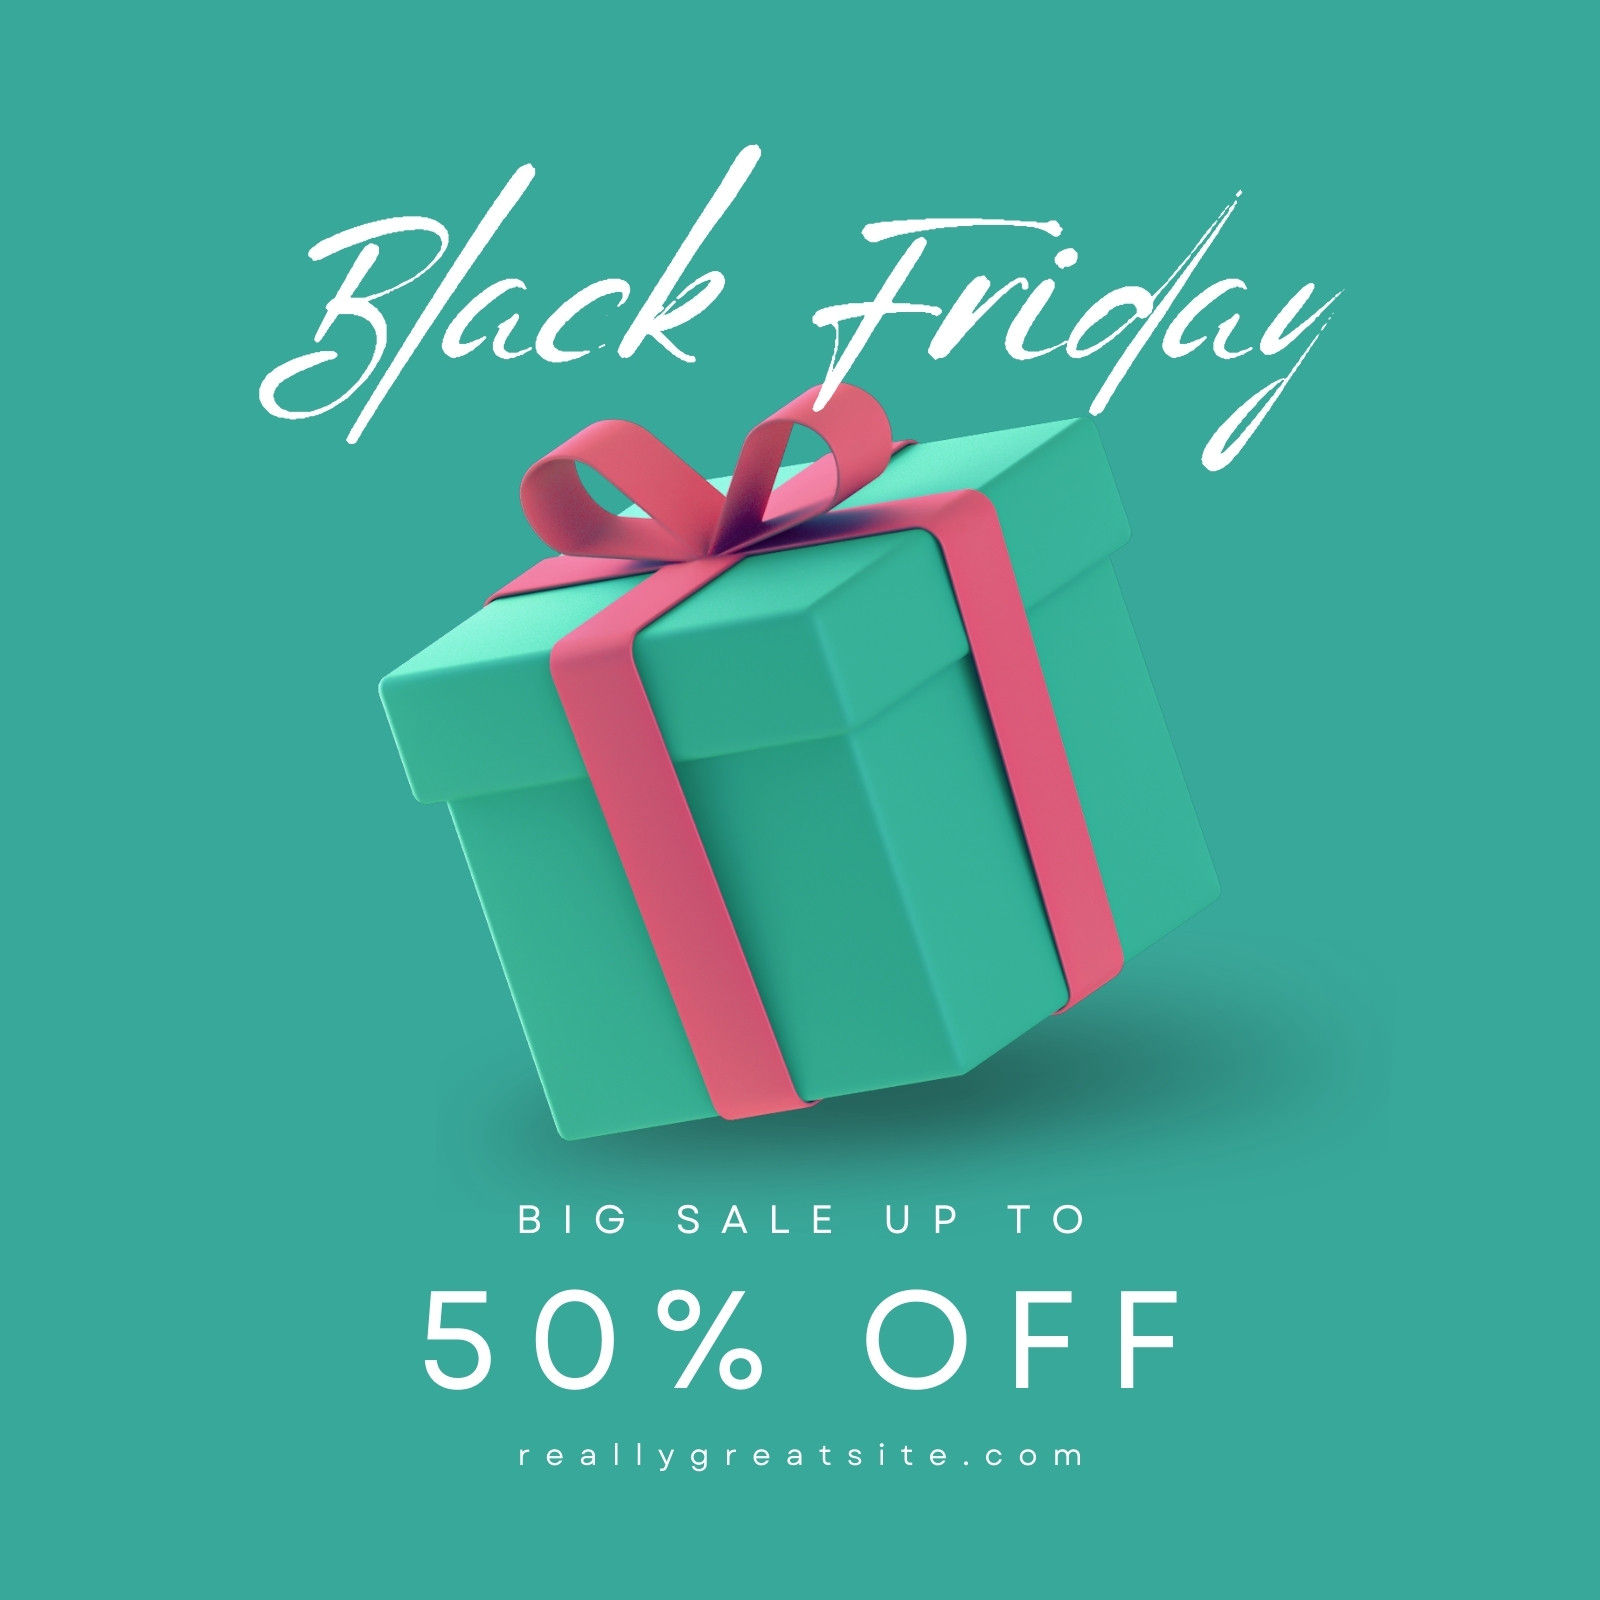 Page 7 - Free and customizable black friday templates